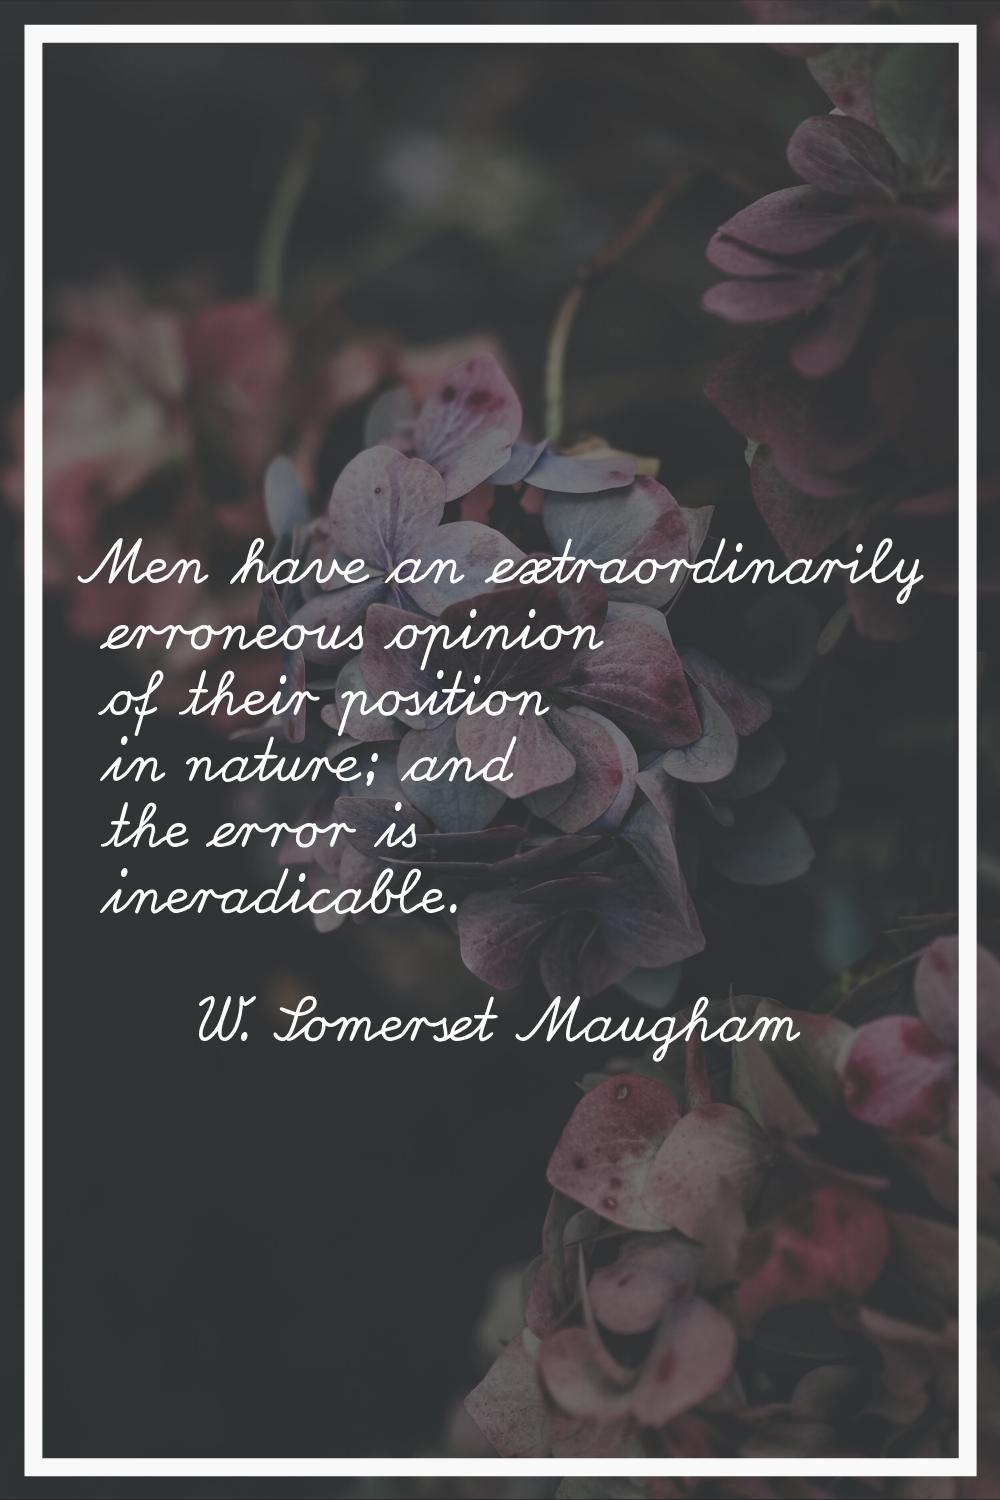 Men have an extraordinarily erroneous opinion of their position in nature; and the error is ineradi